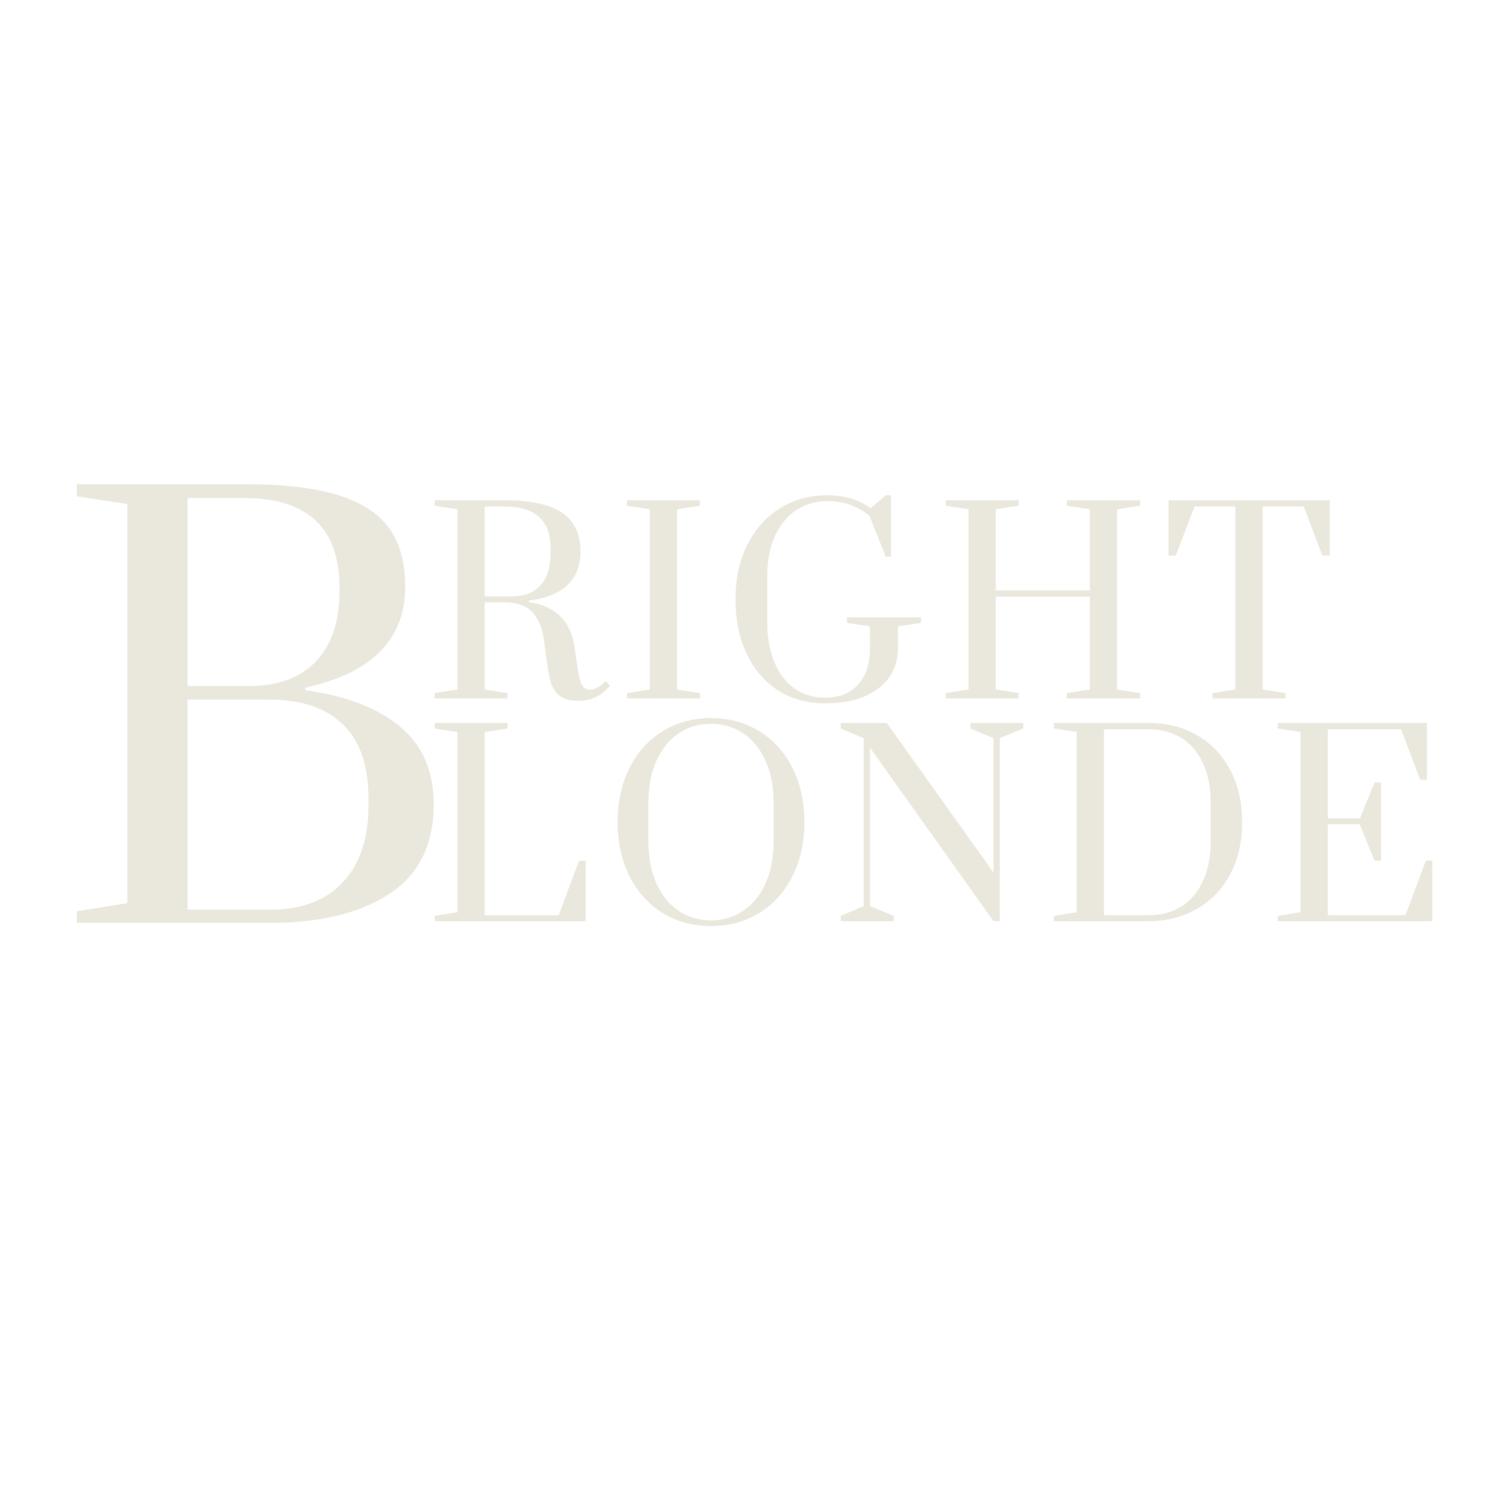 The Bright Blonde